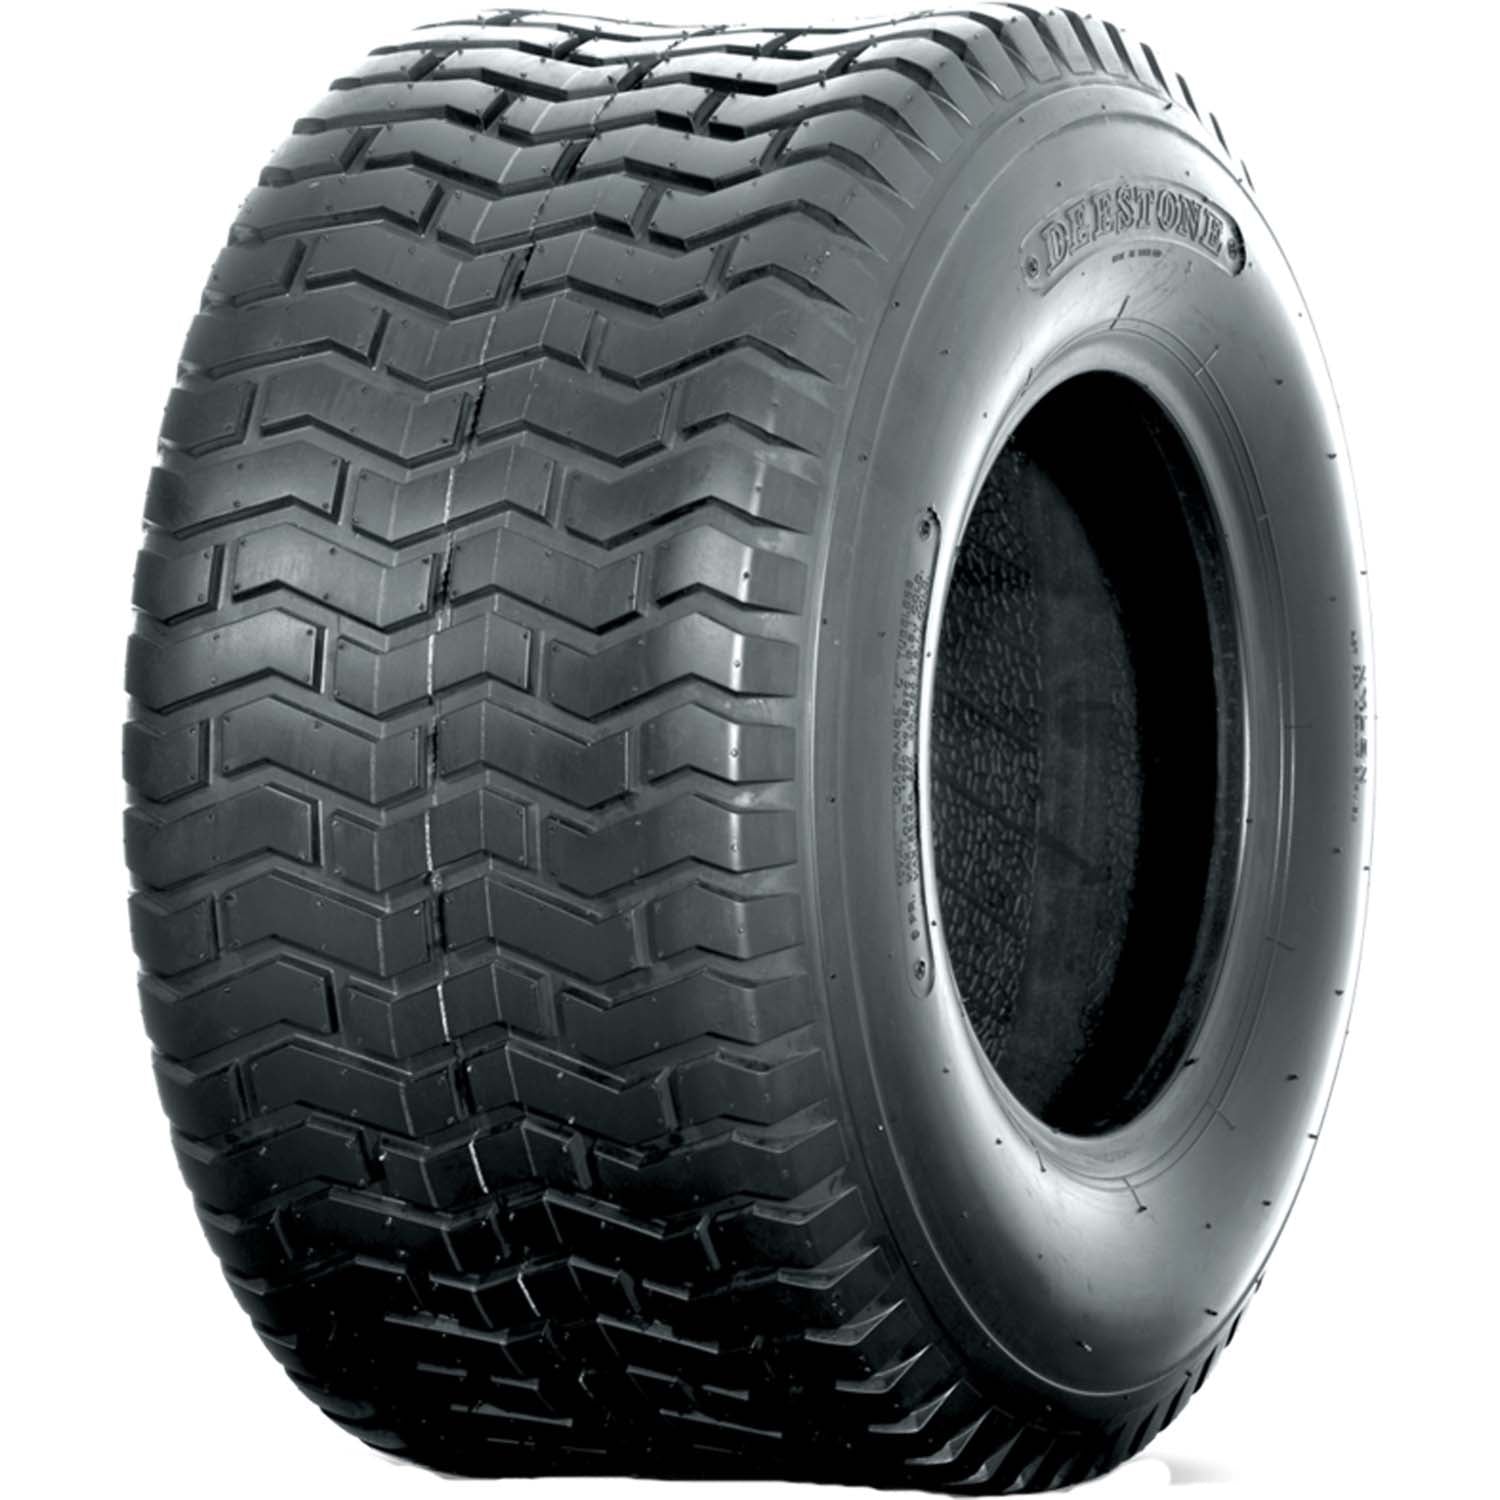 Deestone D265 Lawn and Garden Tire 4ply 18x8.50-8